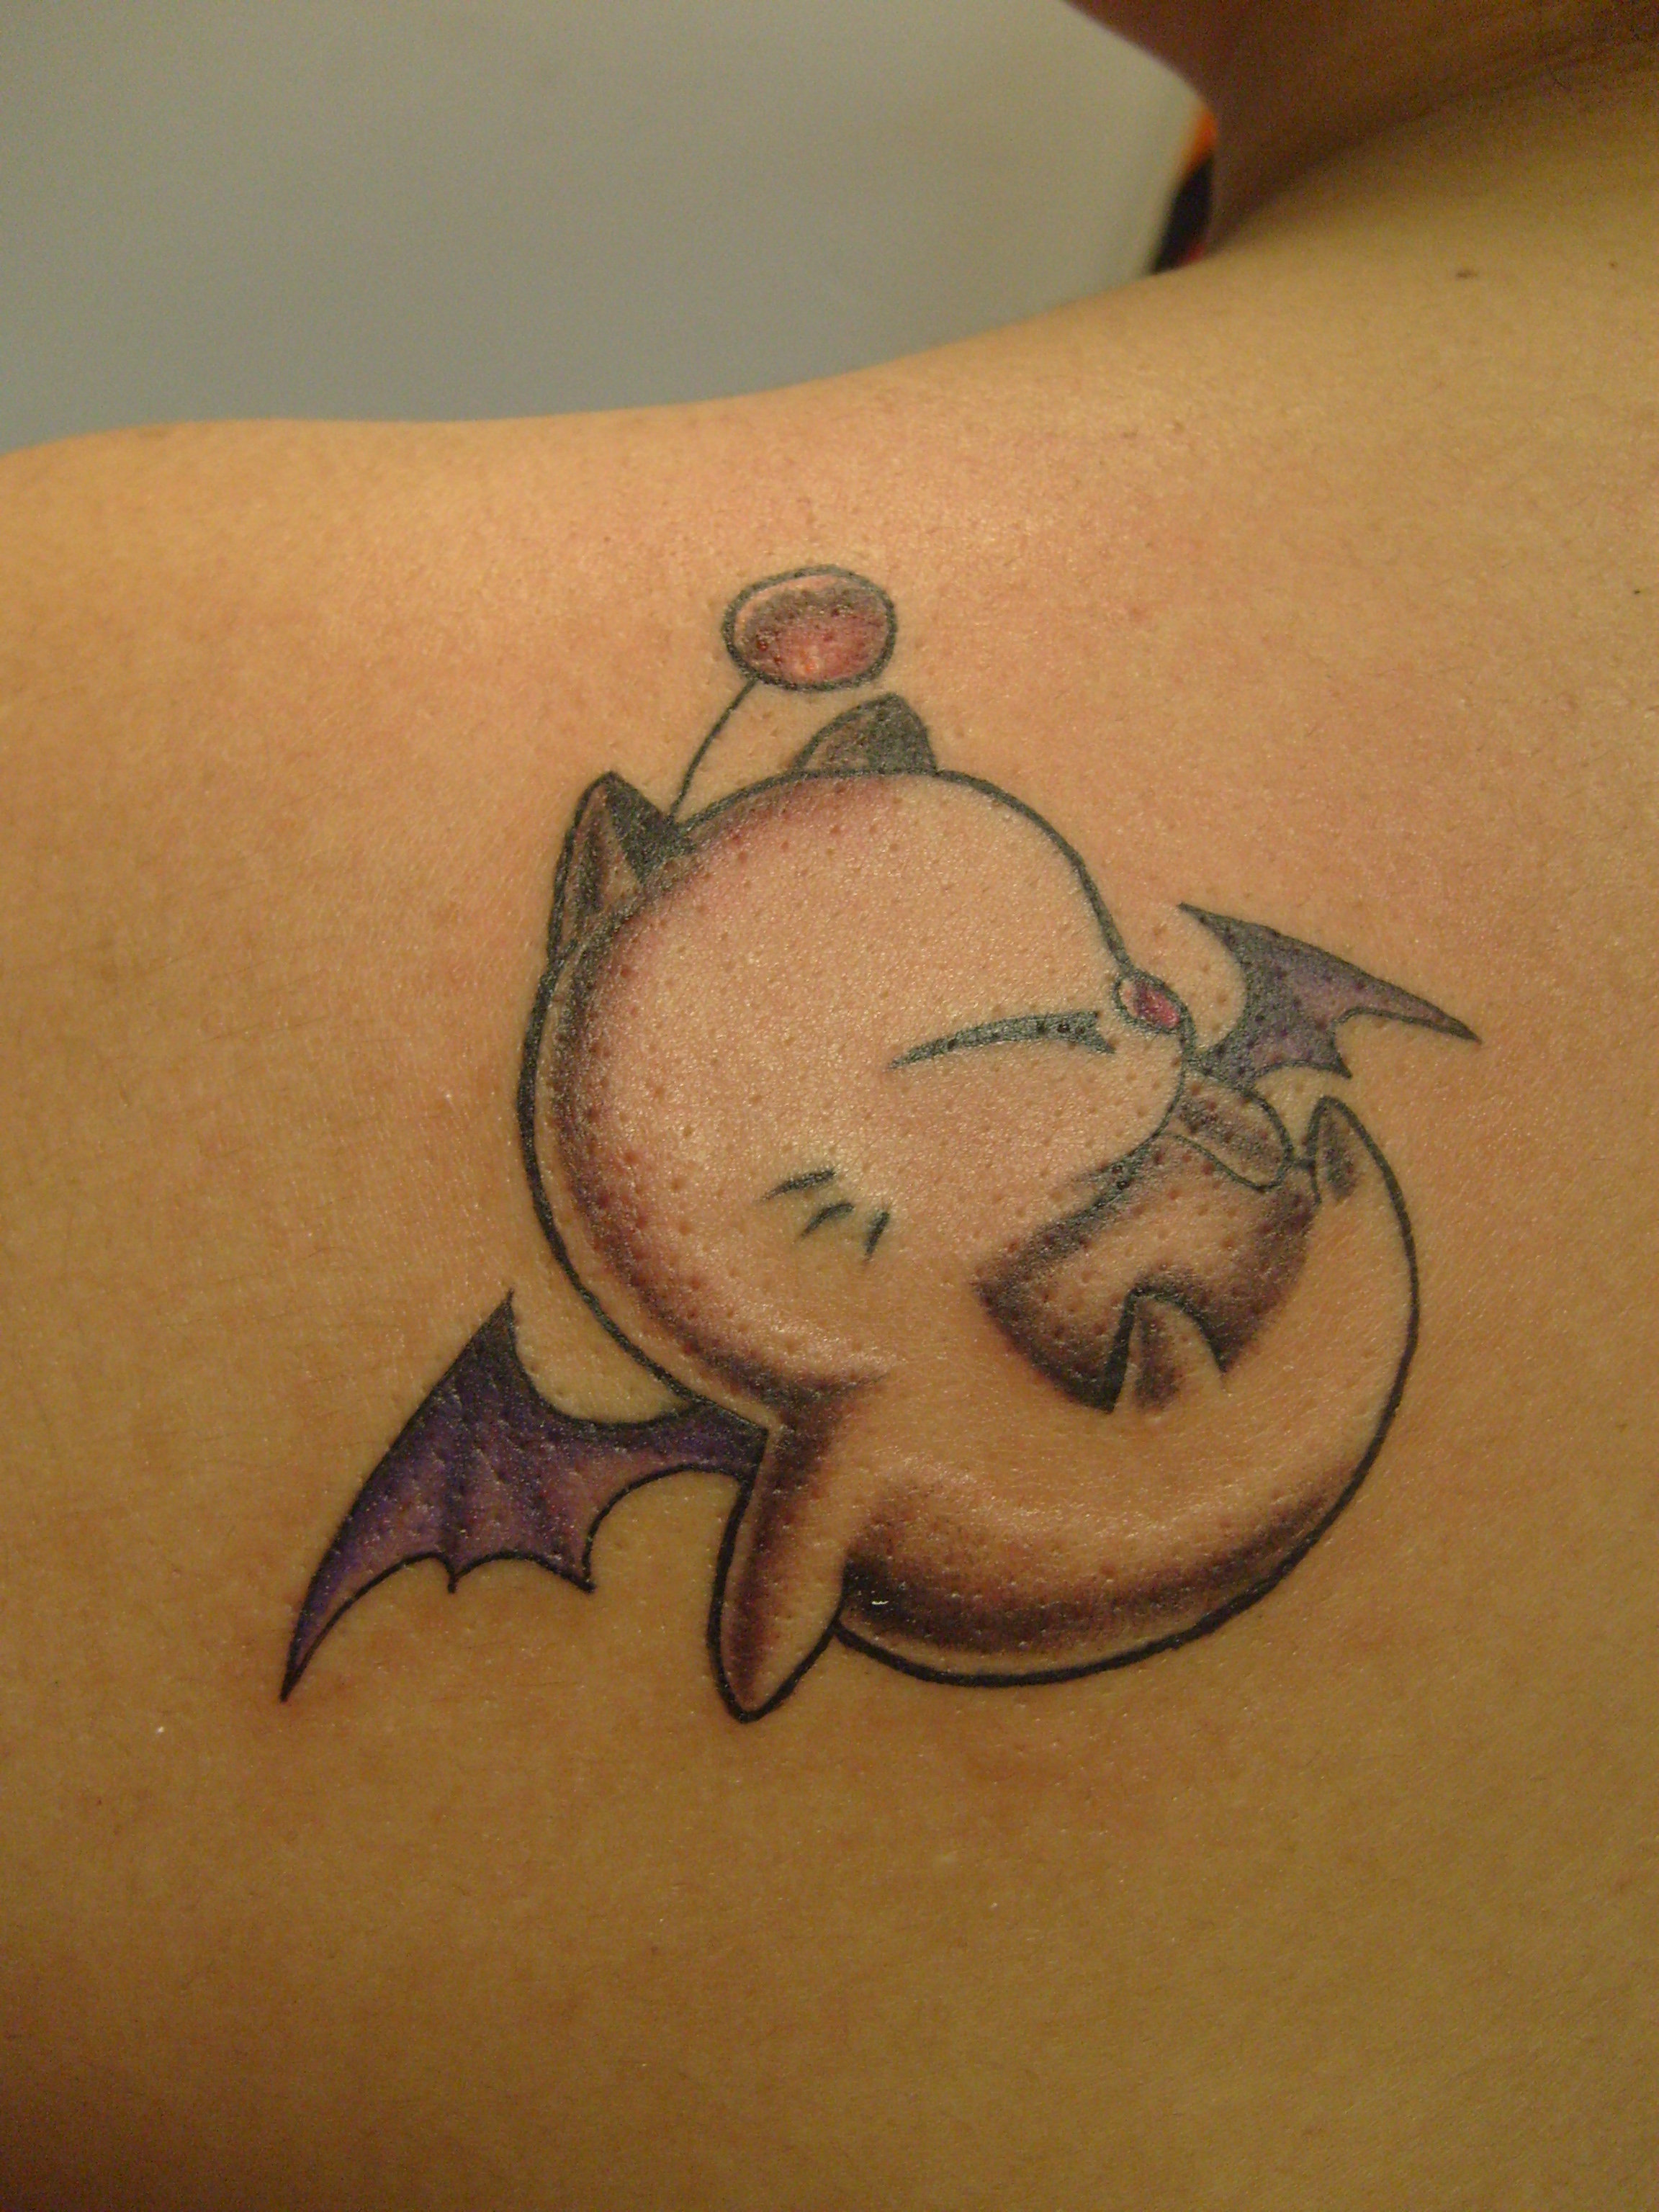 moogle tattoo by withwings18 on DeviantArt